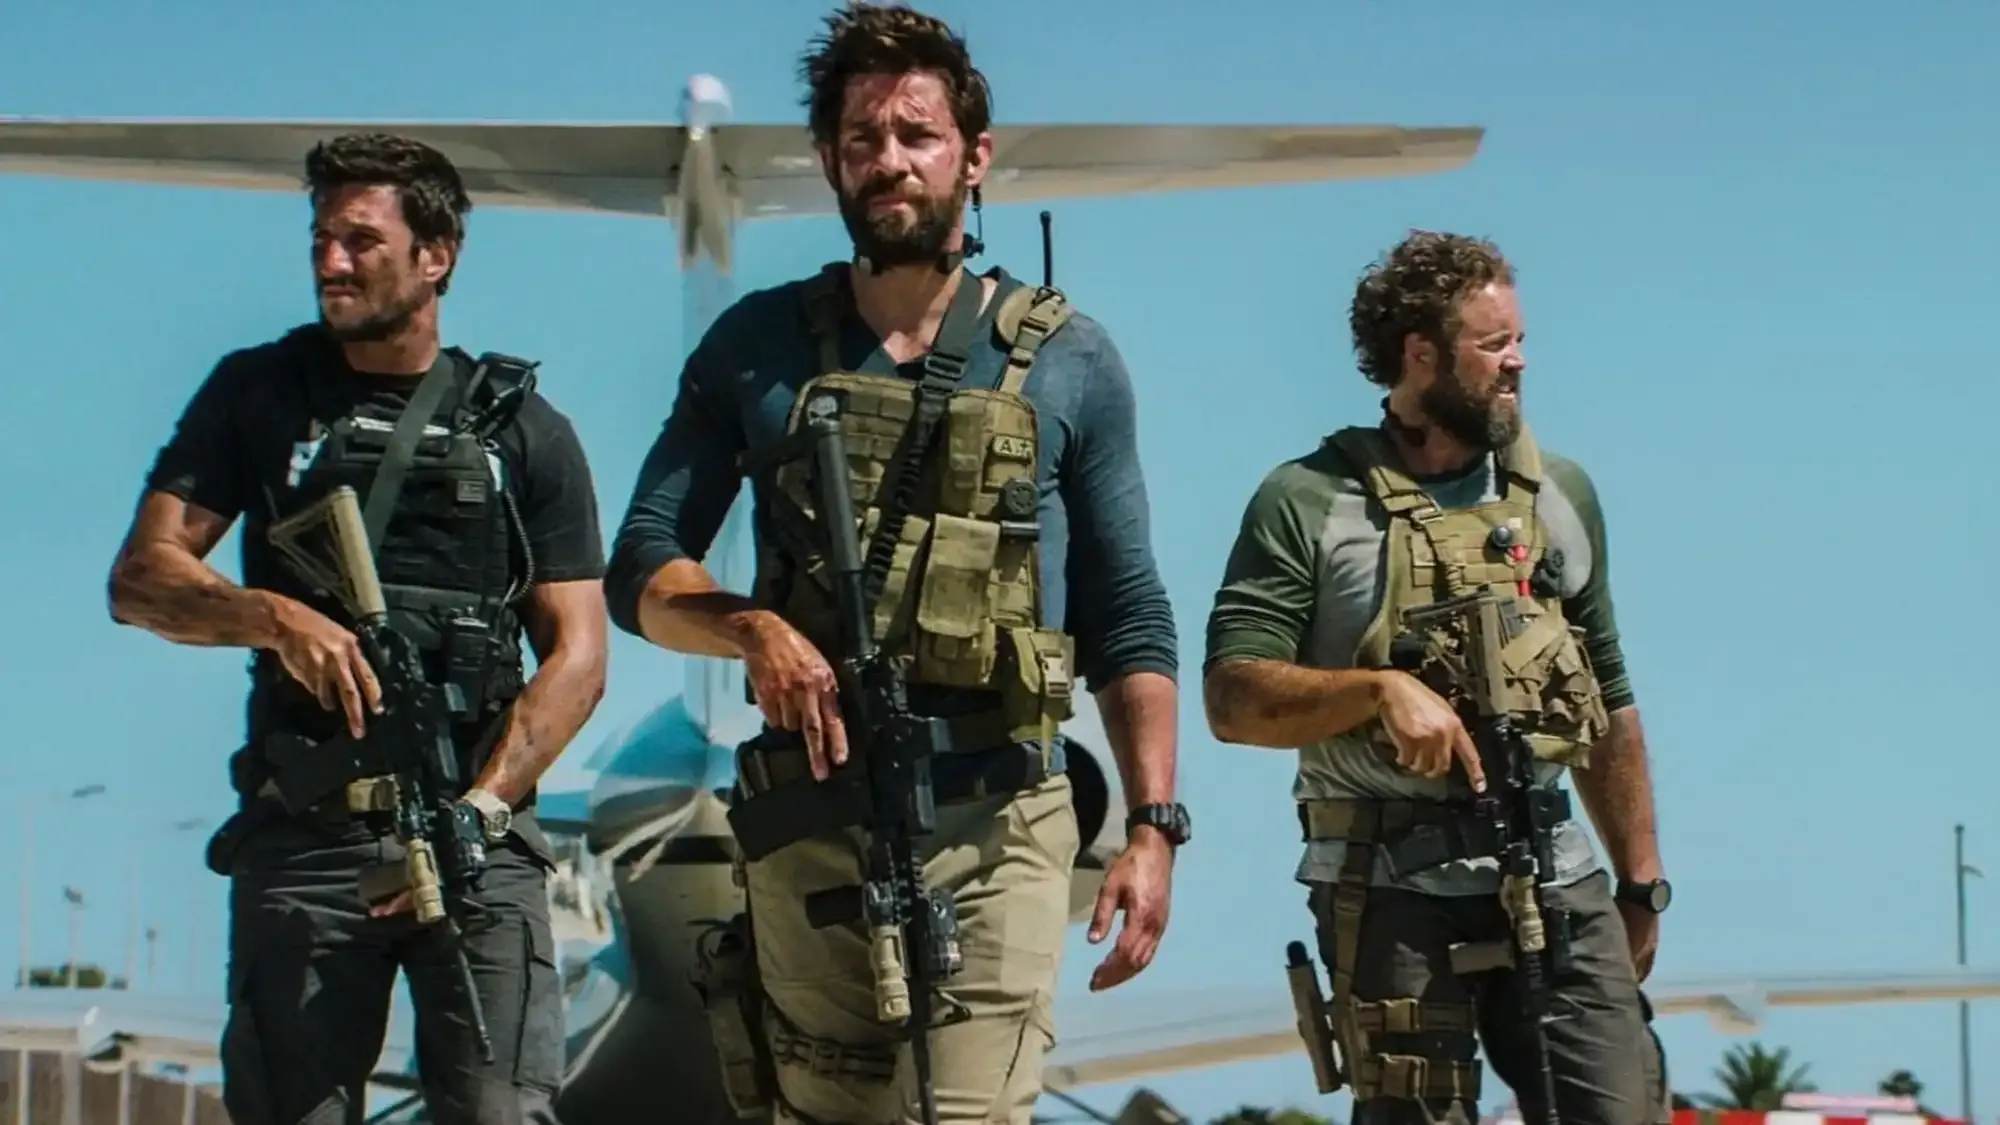 13 Hours: The Secret Soldiers of Benghazi movie review